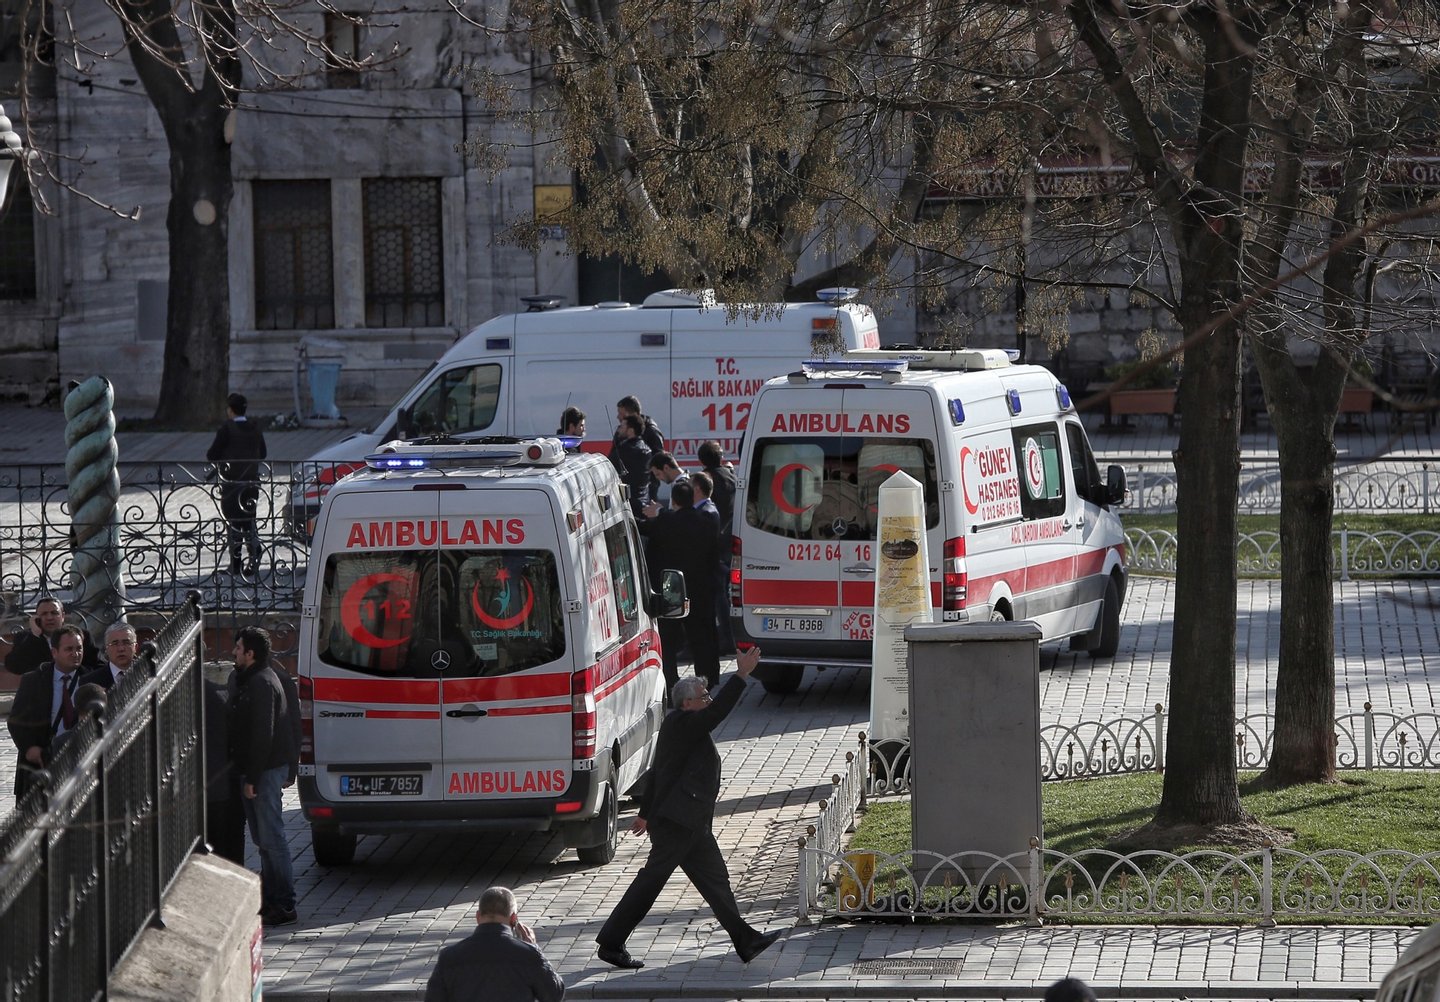 ISTANBUL, TURKEY -  JANUARY 12: Ambulances and police were despatched to the blast site after an explosion in the central Istanbul Sultanahmet district on January 12, 2016 in Istanbul, Turkey. At least 10 people have been killed and 15 wounded in a suicide bombing near tourists in the central Istanbul historic Sultanahmet district, which is home to world-famous monuments including the Blue Mosque and the Hagia Sophia. Turkish President Erdogan has stated that the suicide bomber was of Syrian origin. (Photo by Can Erok/Getty Images)